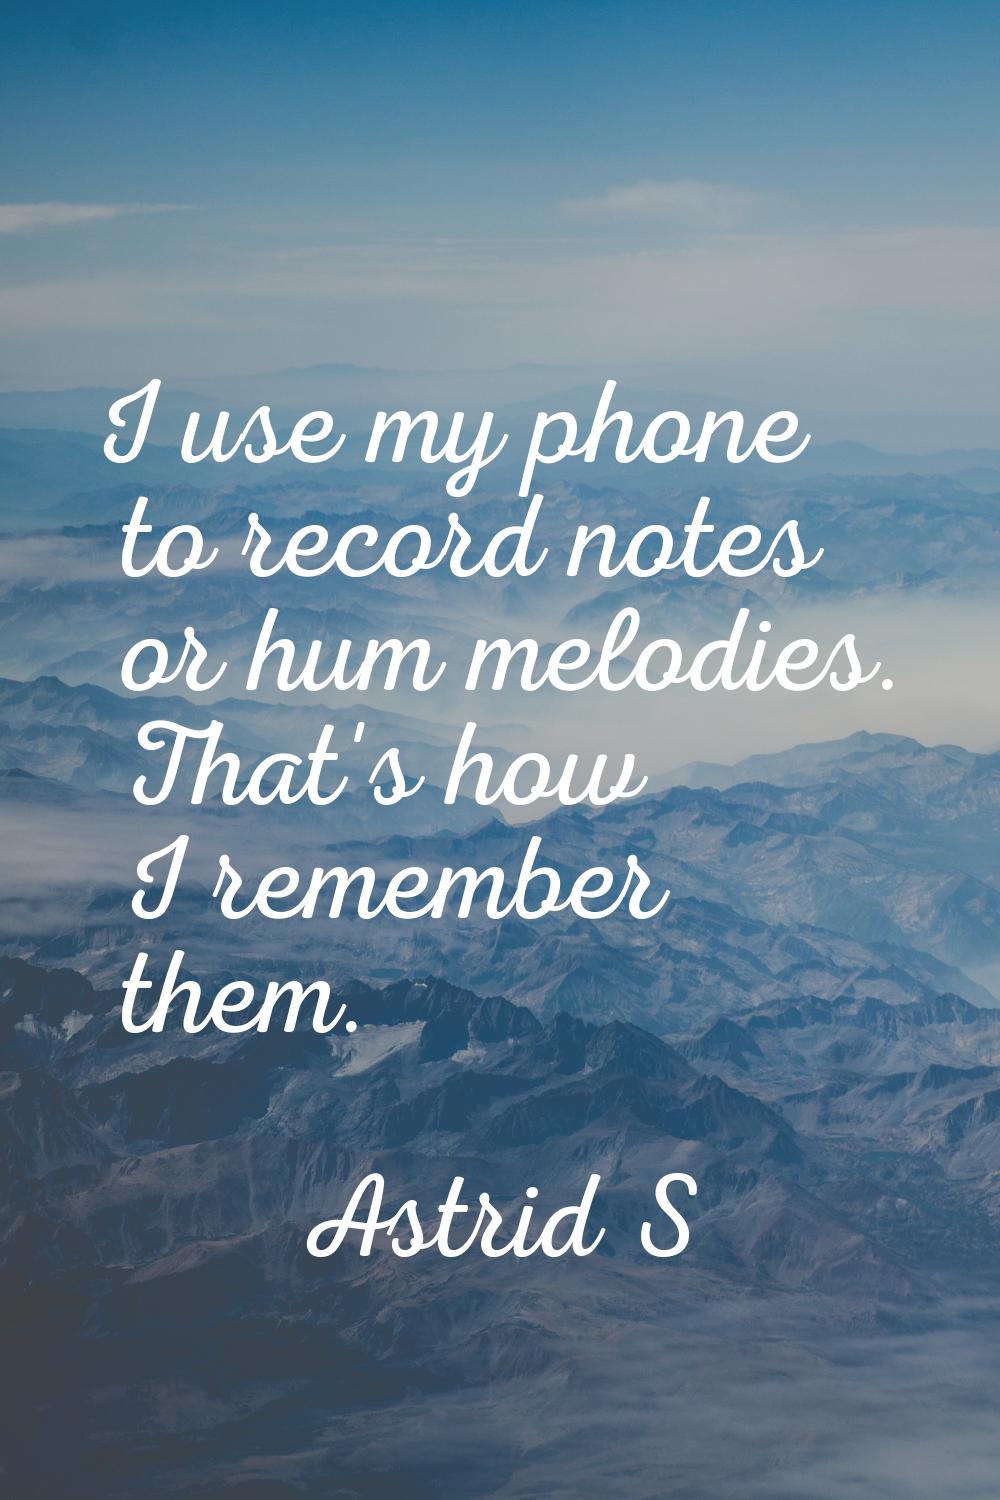 I use my phone to record notes or hum melodies. That's how I remember them.